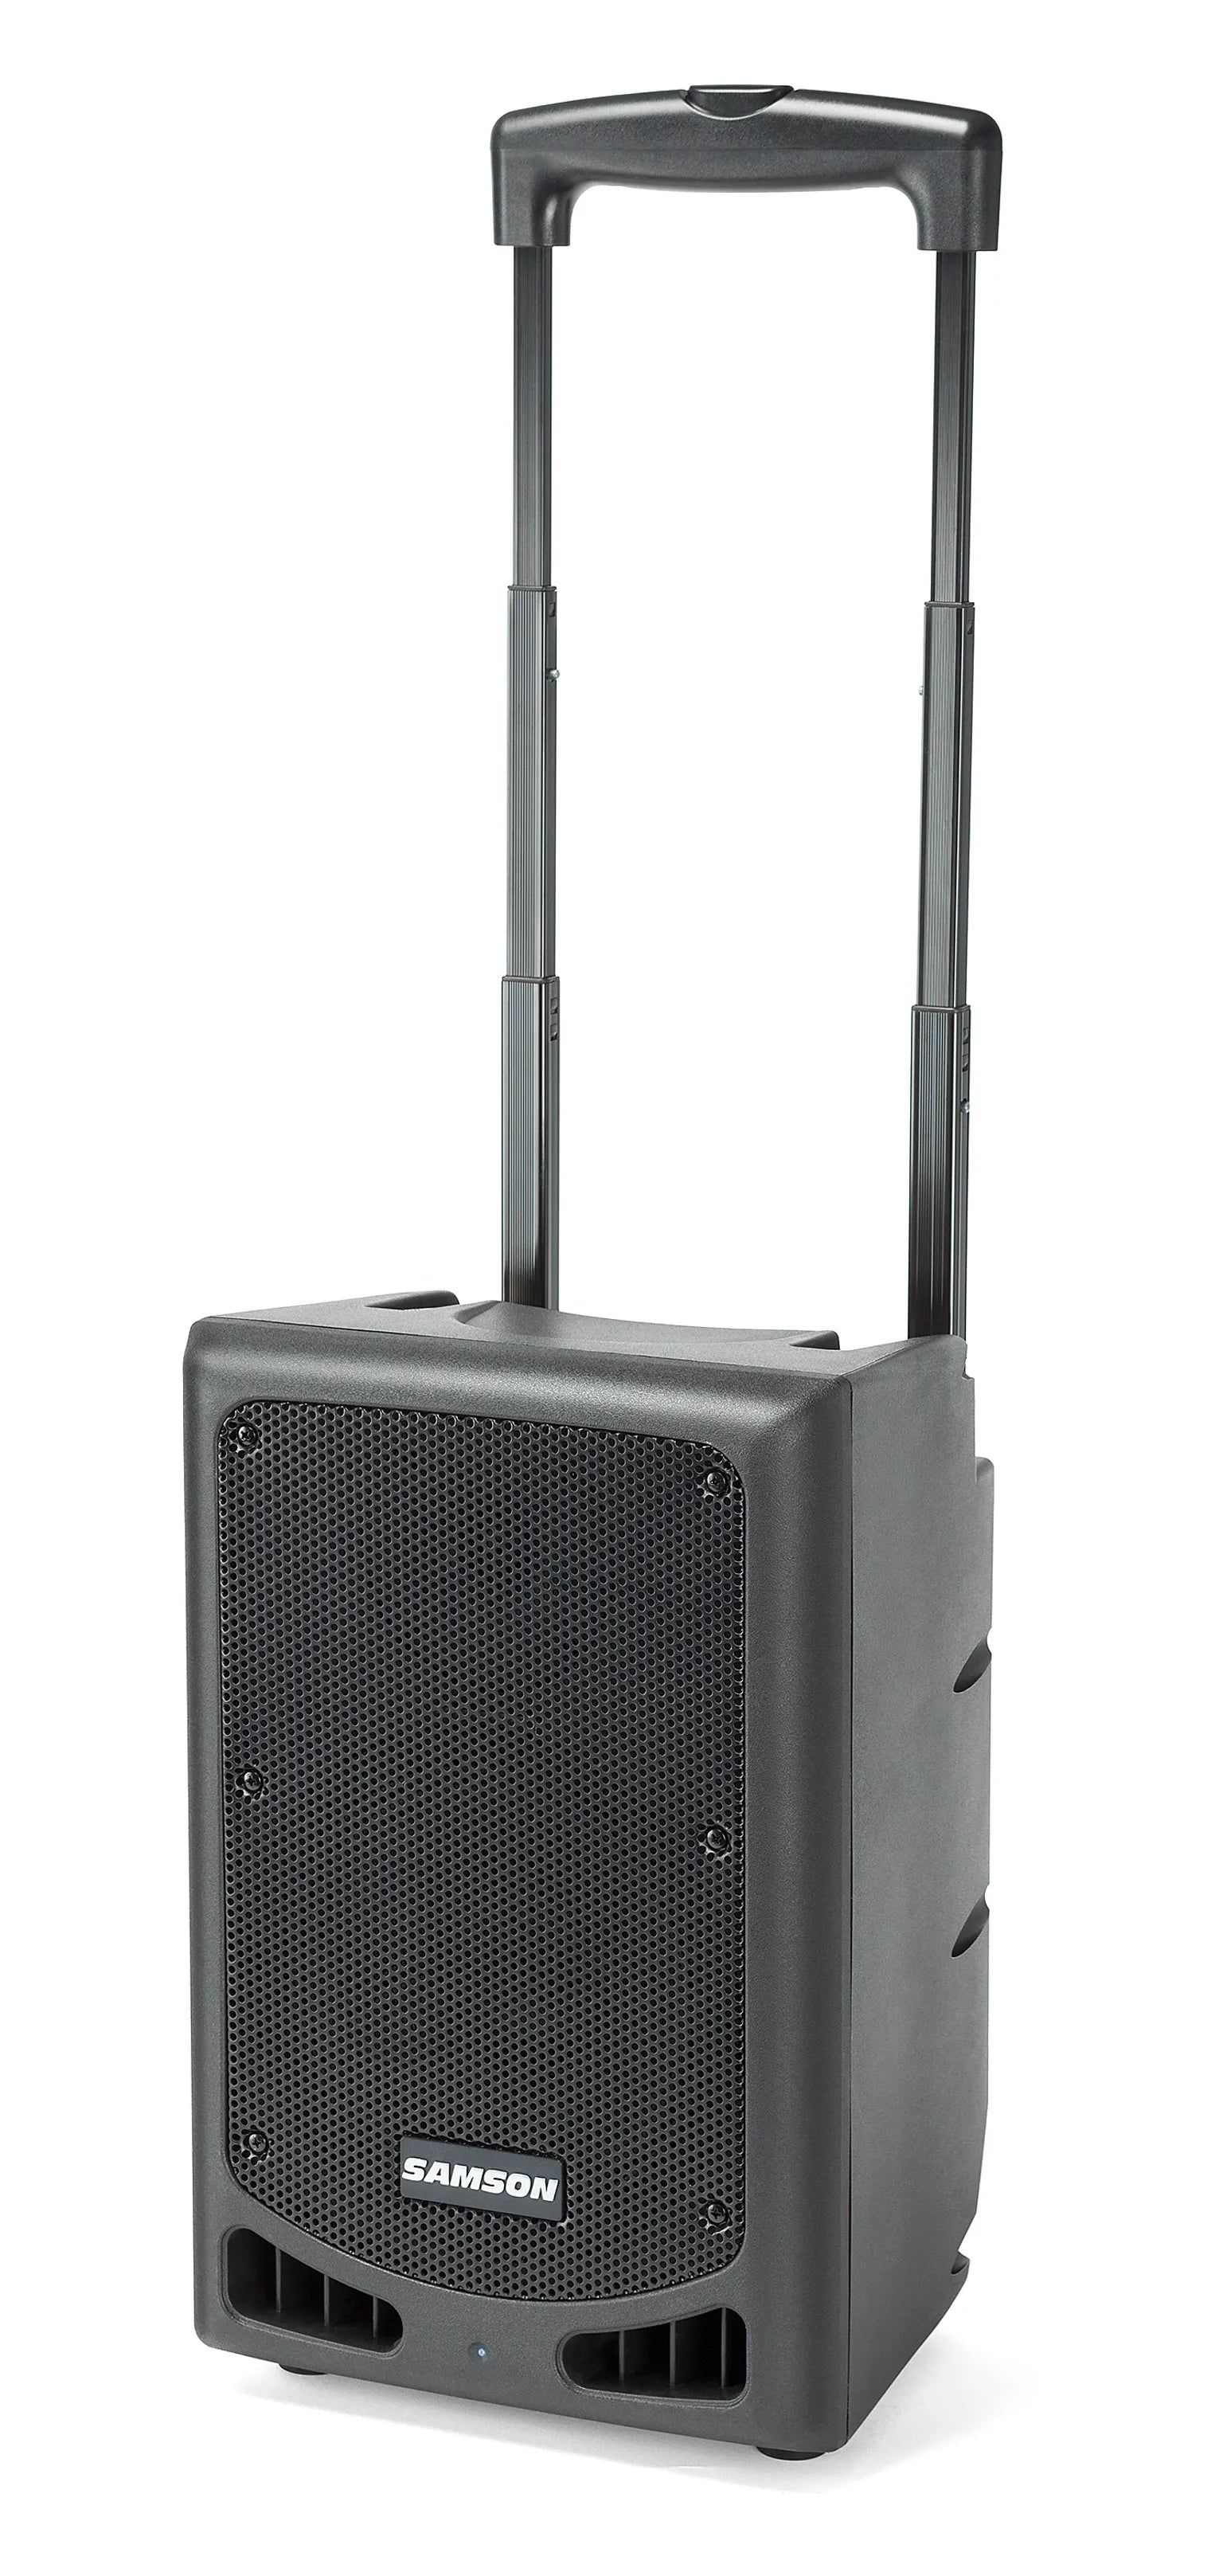 Samson Expedition Xp208w Portable Pa System